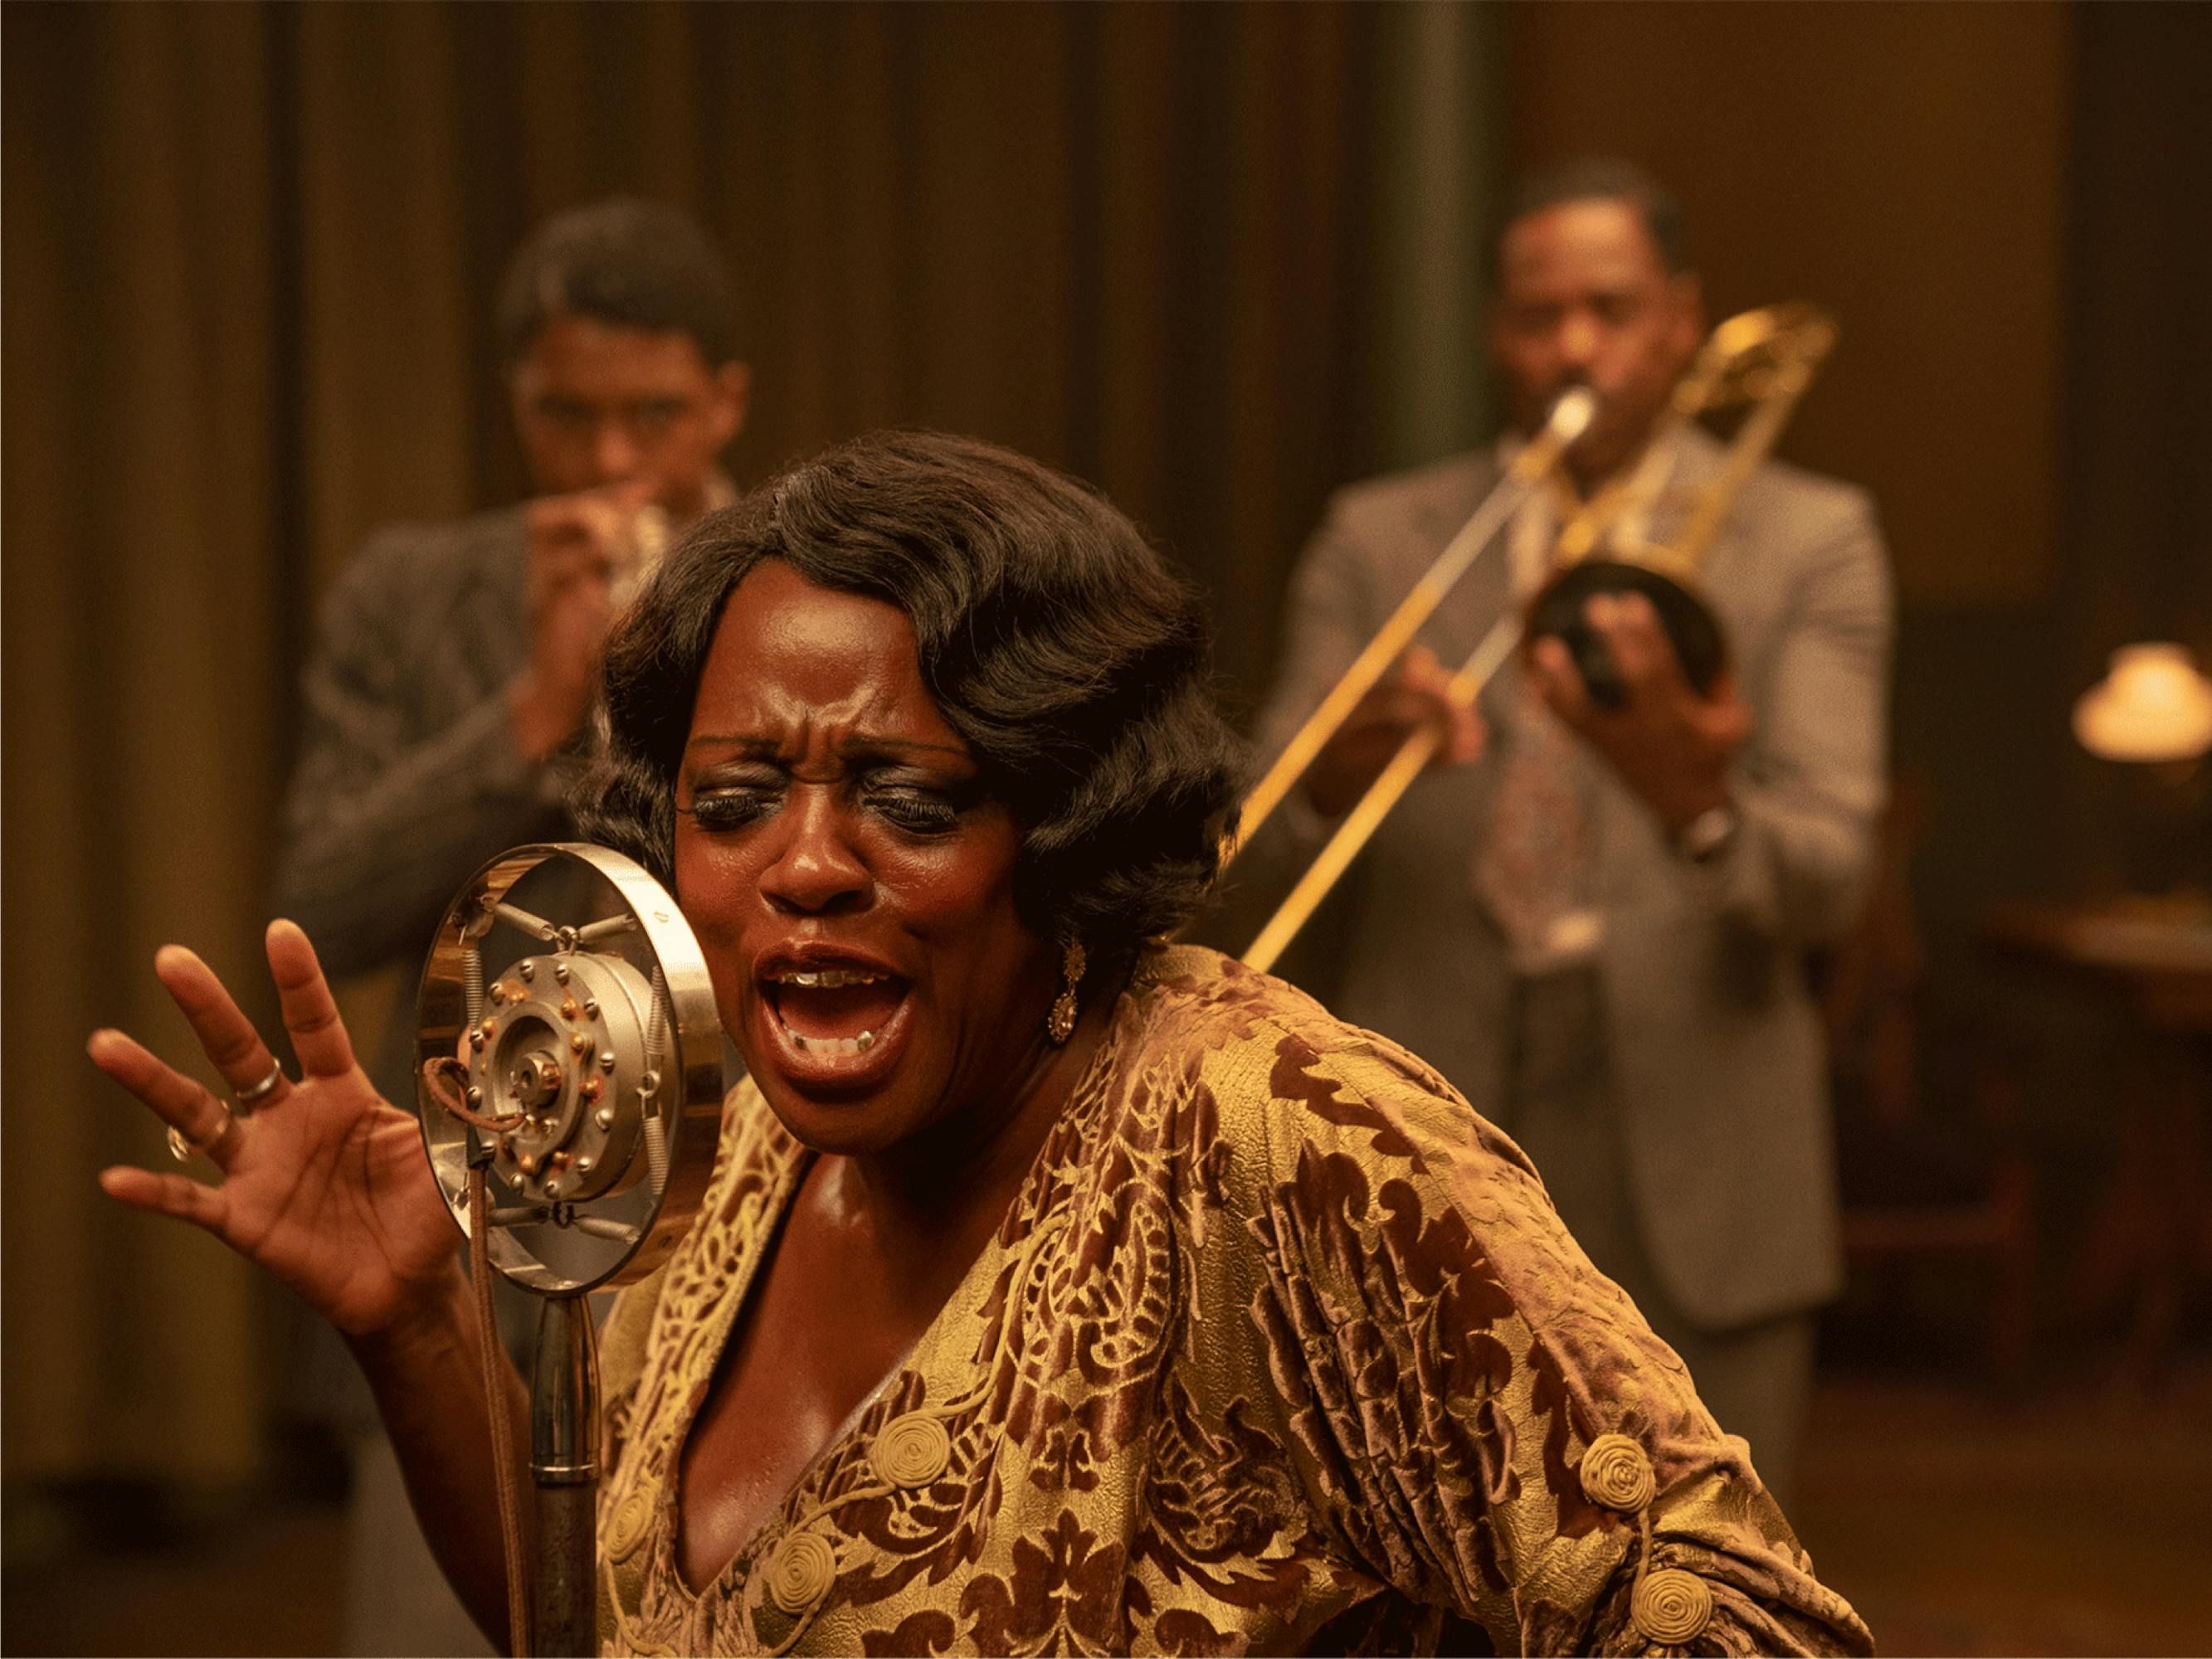 Ma Rainey (Davis) sings into her mic, one hand raised expressively. In the background, band members Levee (Boseman) and Cutler (Colman Domingo) play their horns.